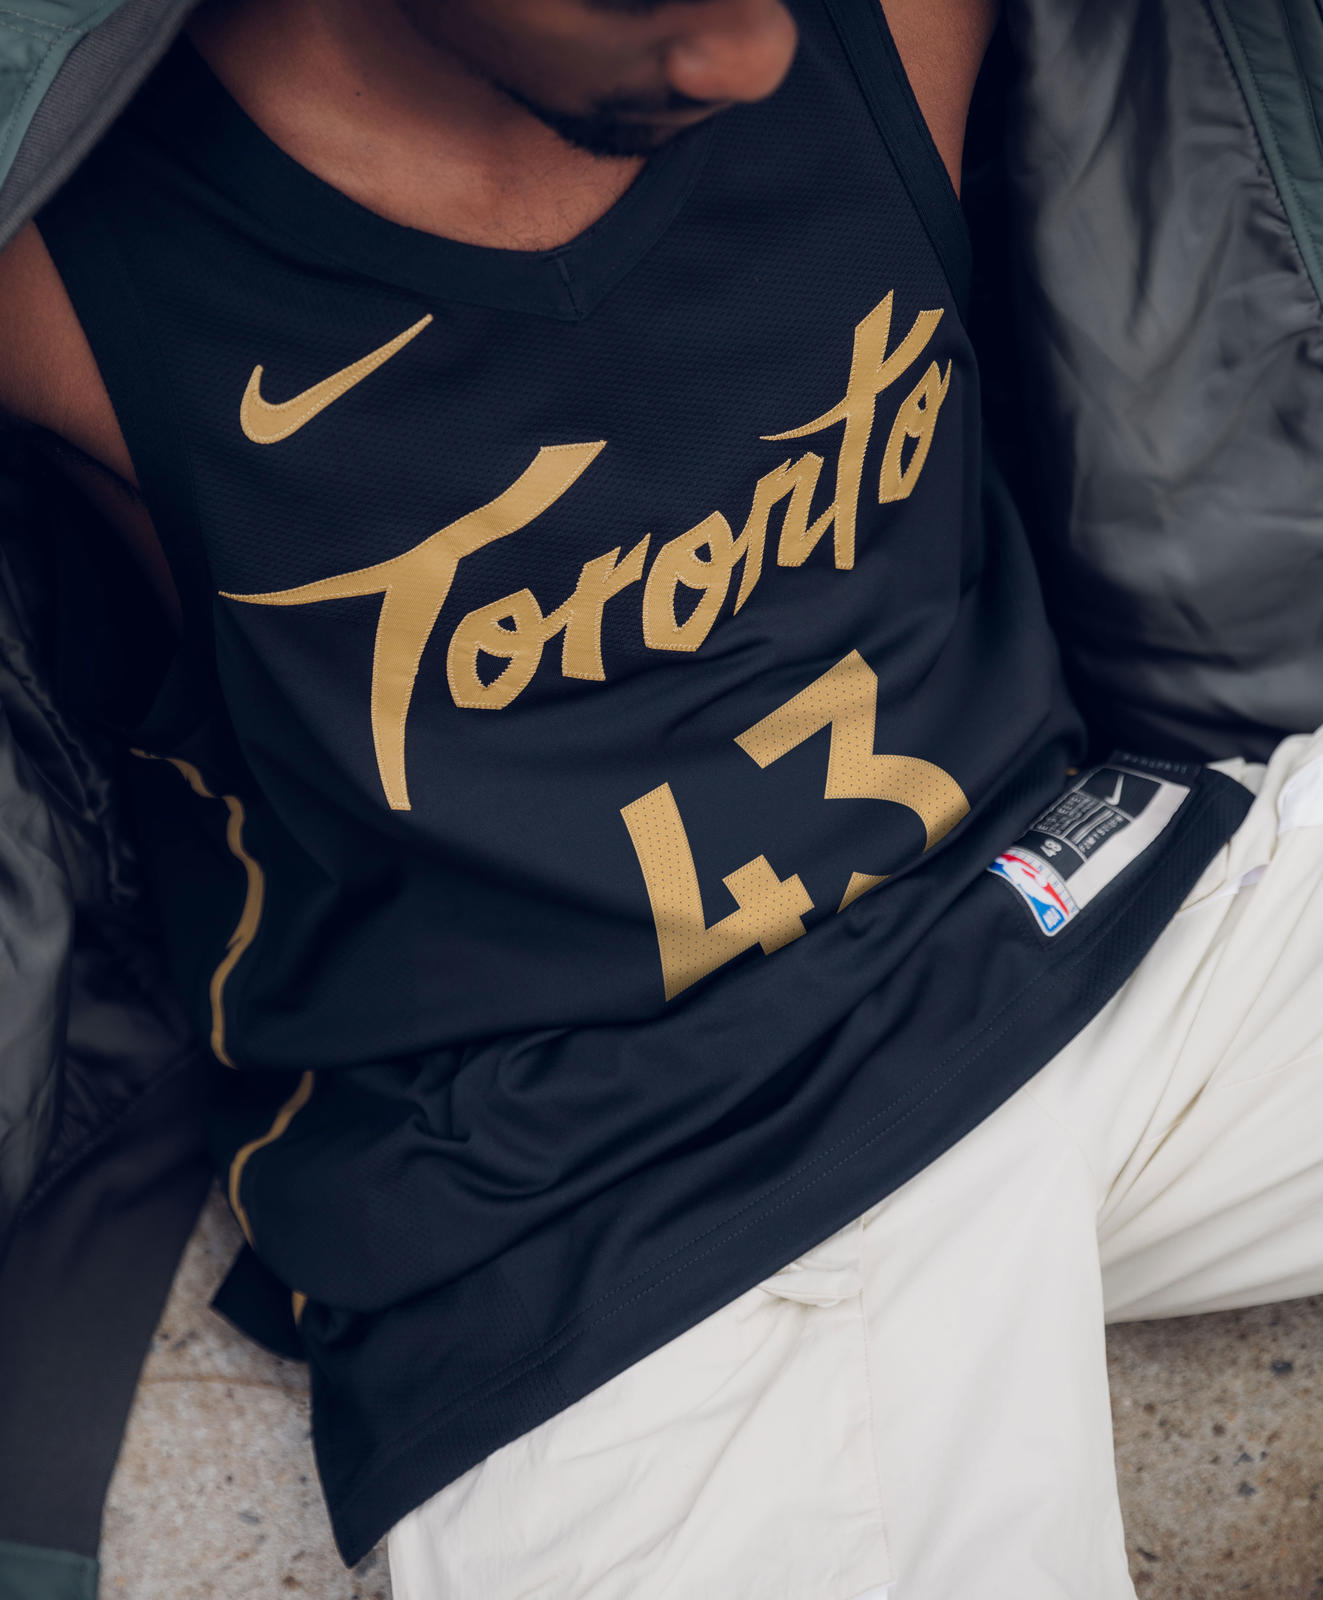 The Raptors Will Bring Back Their Dino Jerseys For The 2019-20 Season